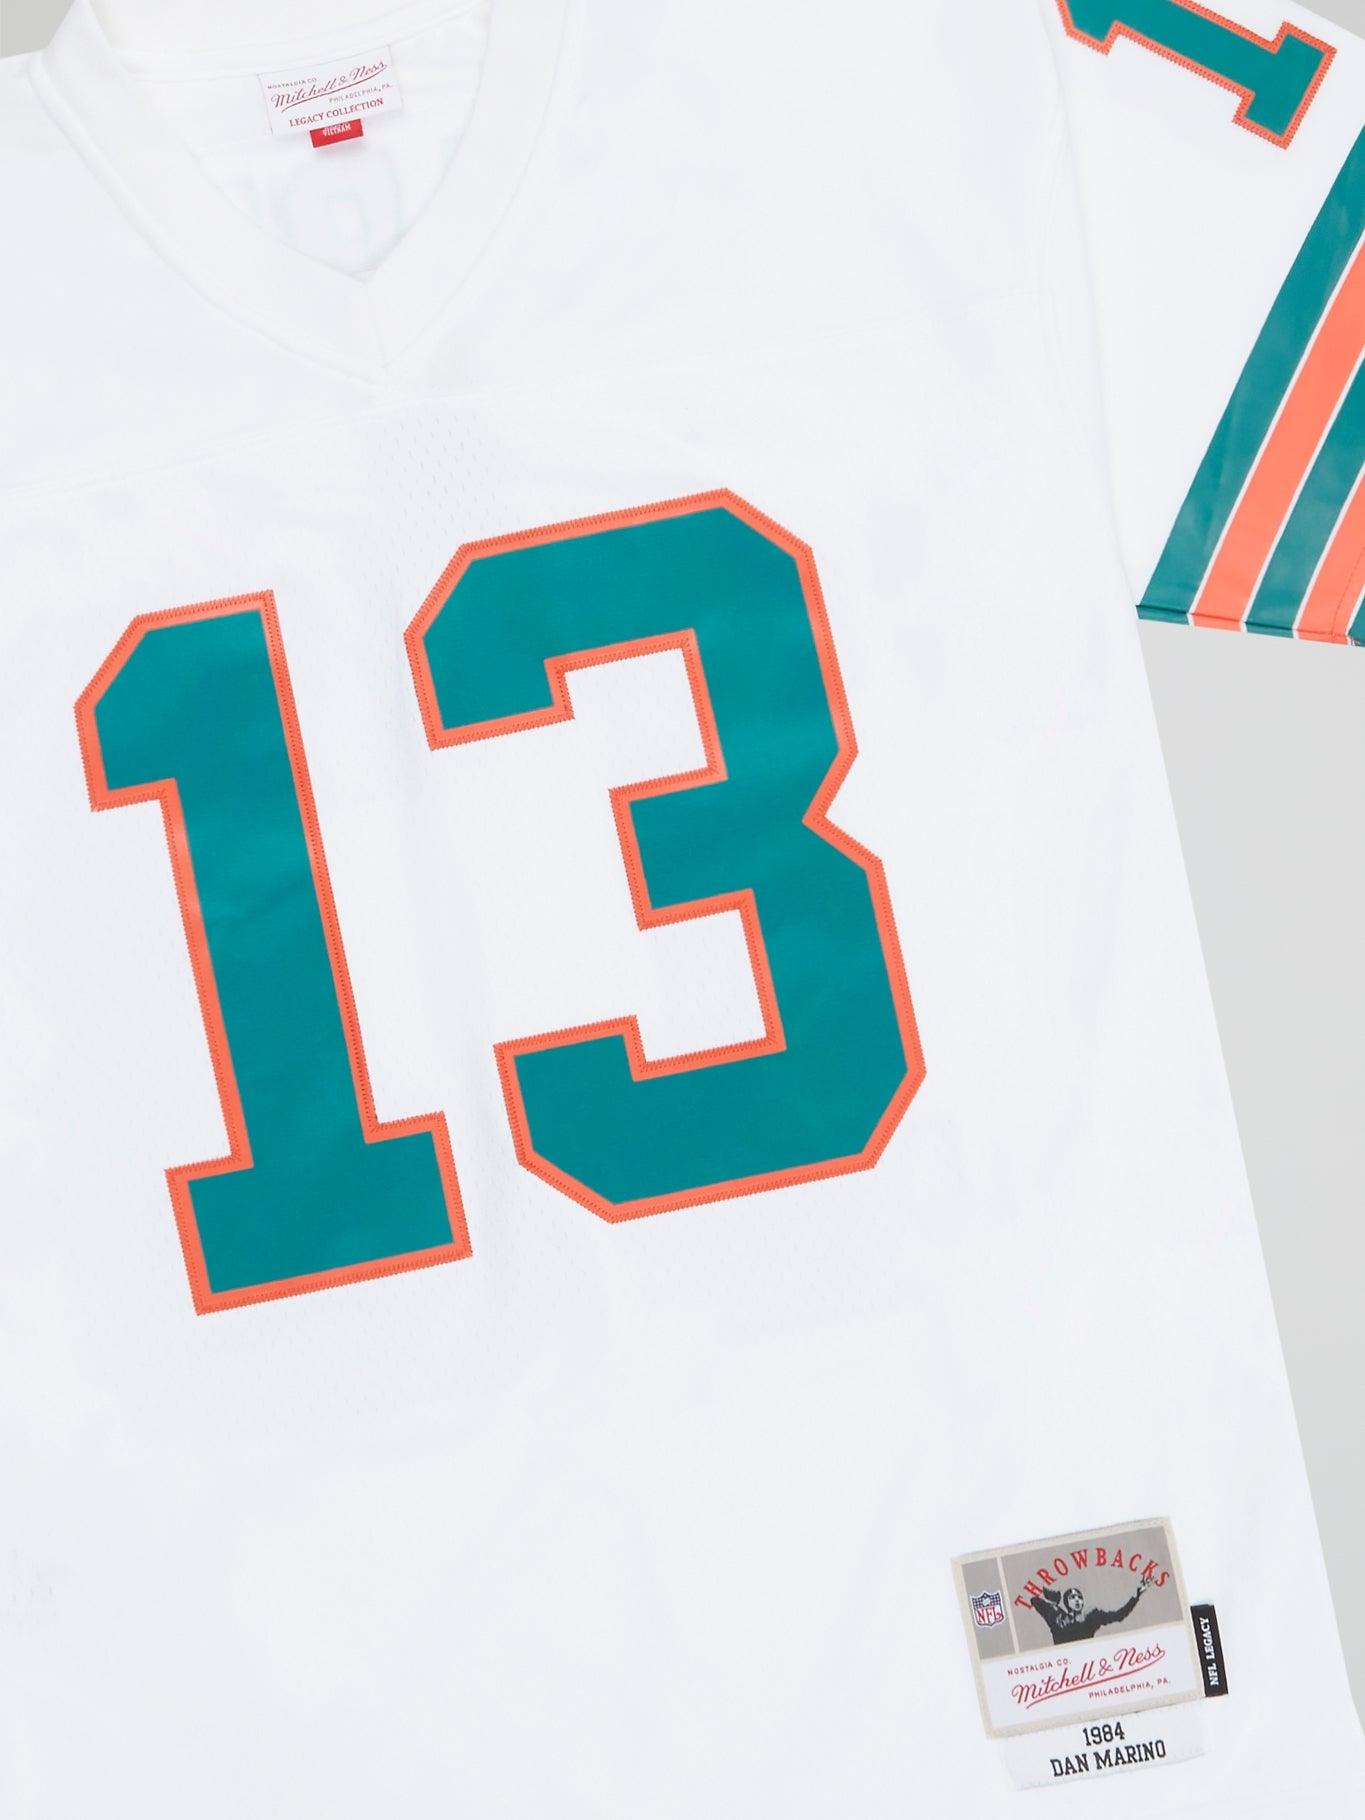 Mitchell and Ness - NFL Legacy Jersey Dolphins 1984 Dan Marino